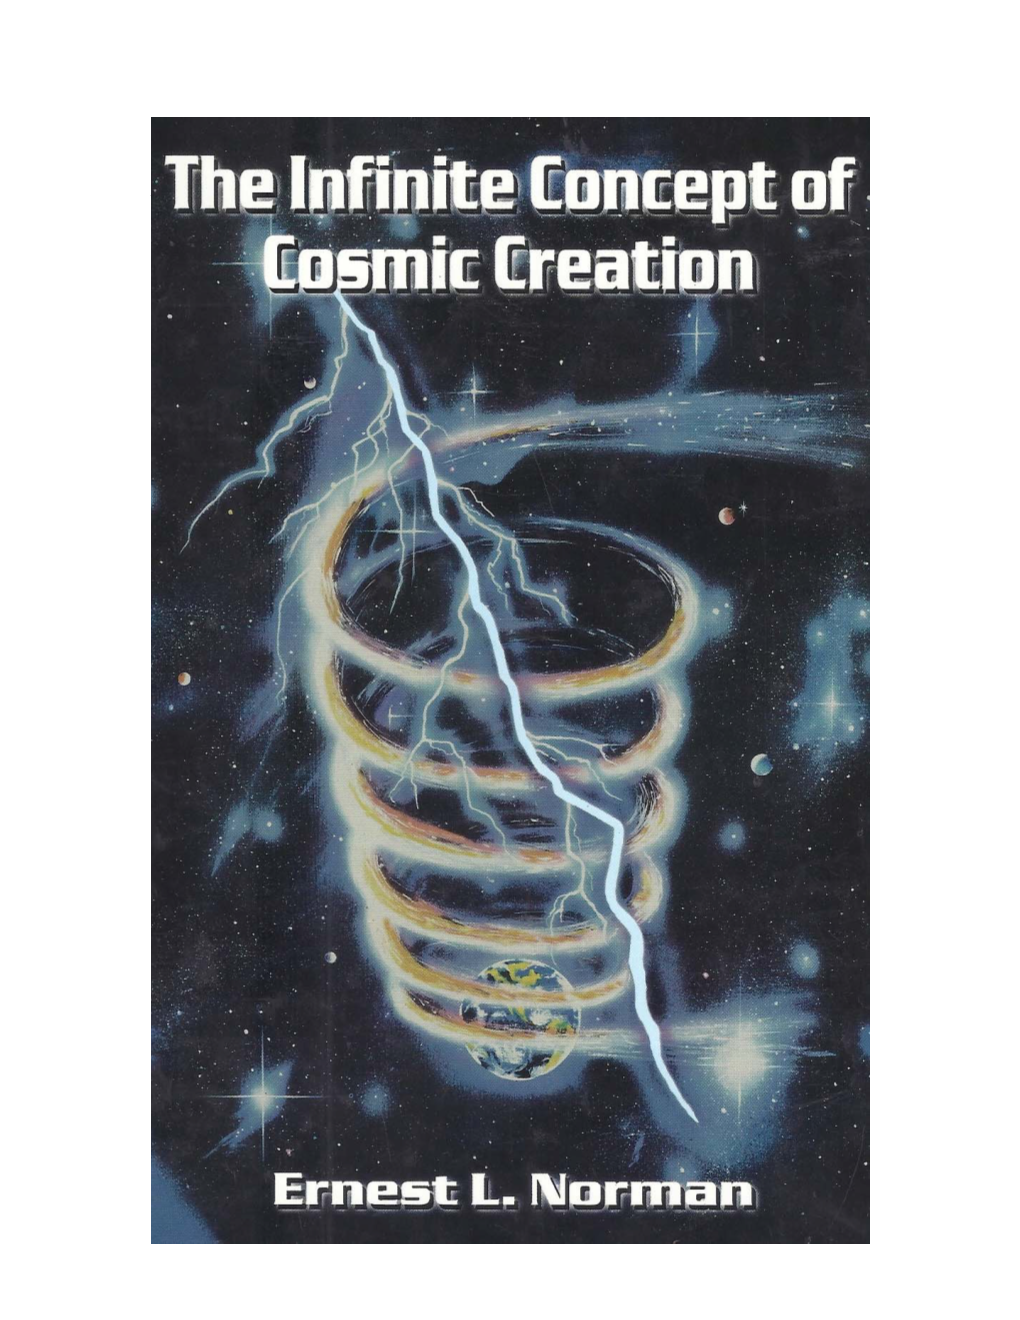 "THE INFINITE CONCEPT of COSMIC CREATION" by Ernest L. Norman